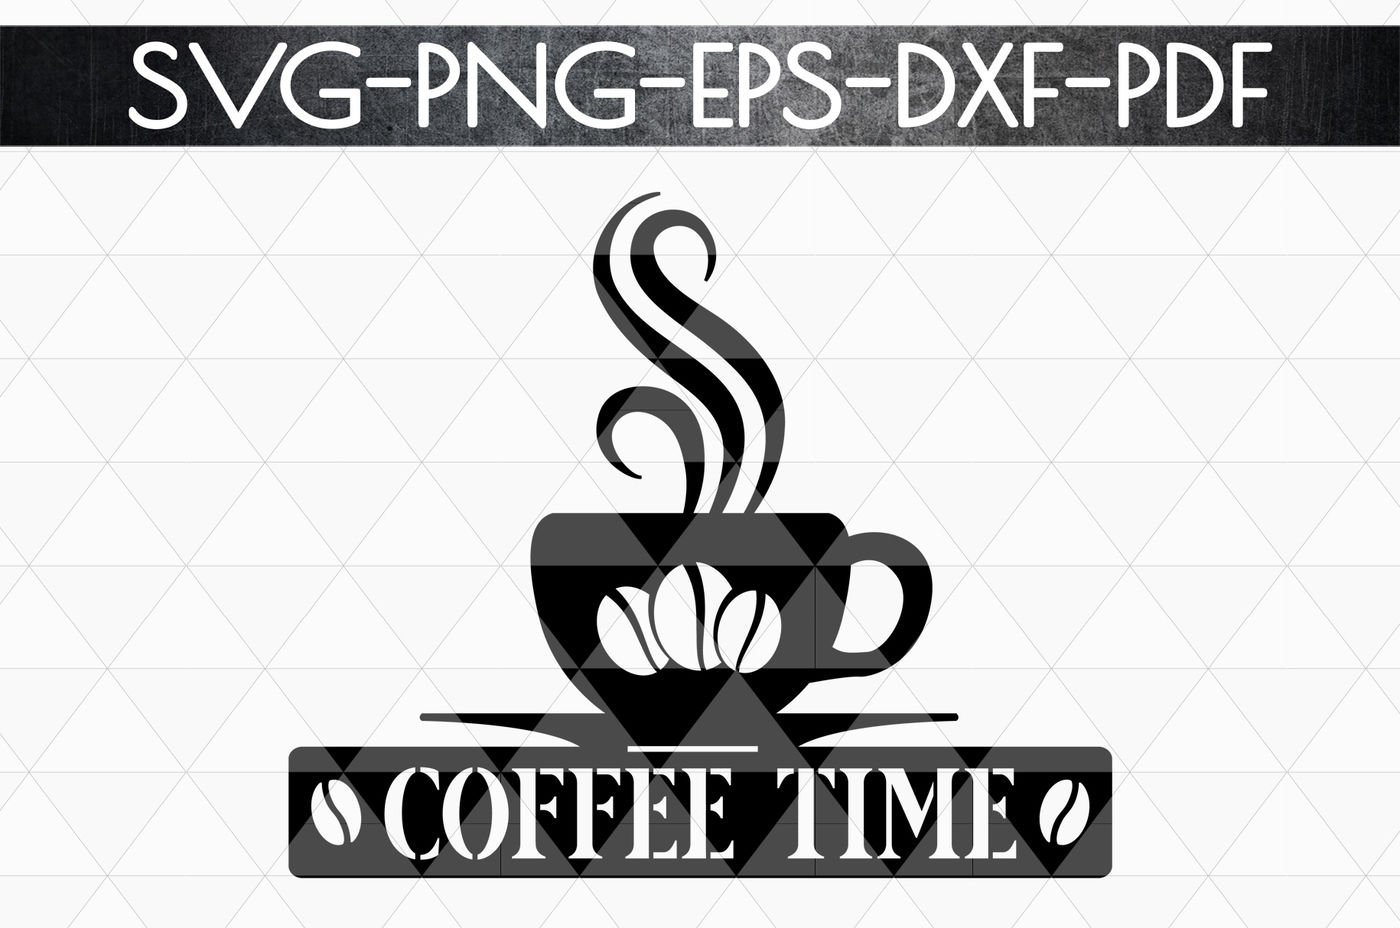 Download Coffee Time Sign Papercut Template Cafe Decor Svg Eps Pdf By Mulia Designs Thehungryjpeg Com